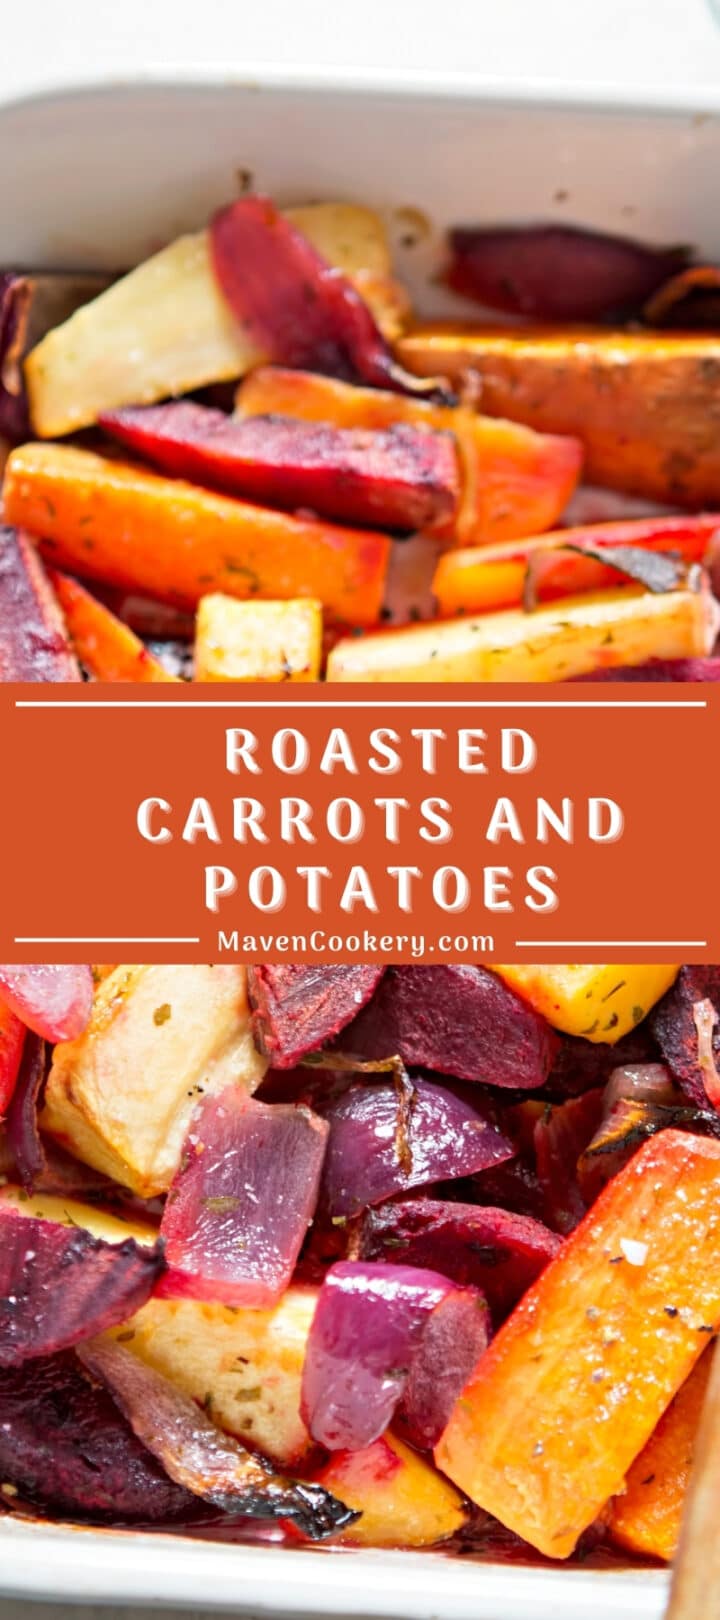 Roasted potatoes, carrots and red onions shown in a ceramic baking dish.